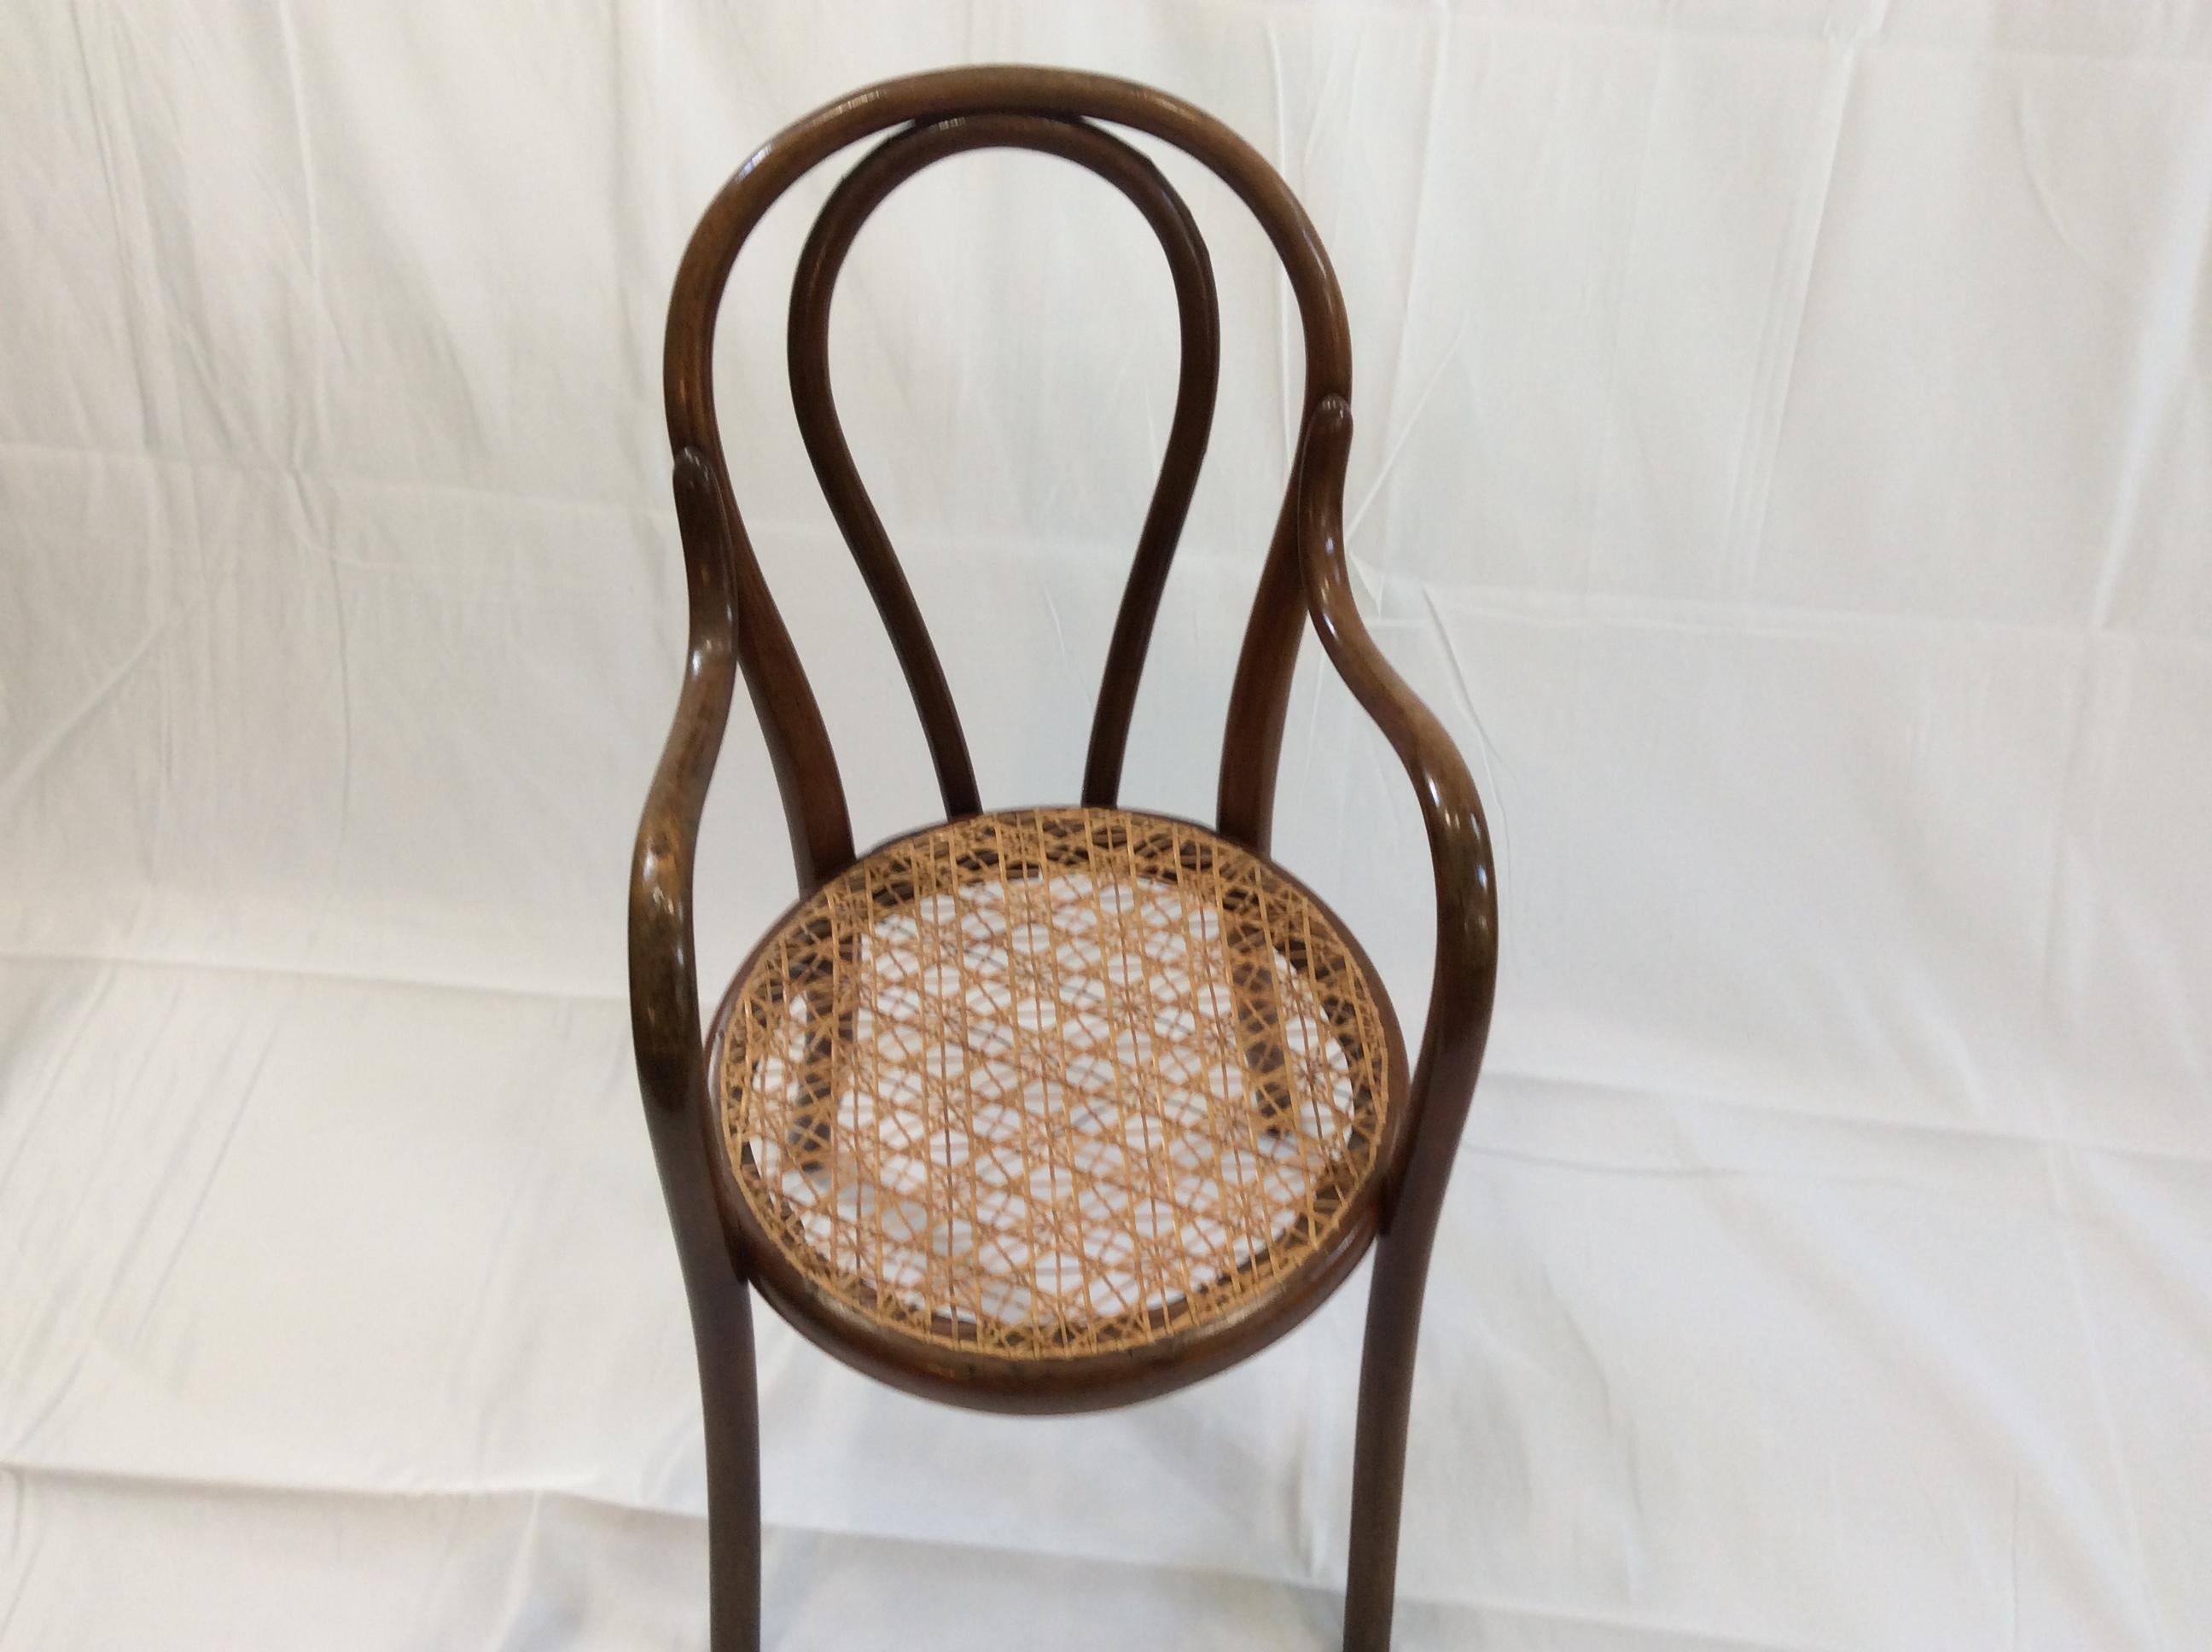 Wonderful Thonet children’s chair, bentwood design perfected by the Thonet family.
The chair has hand caned seat in a star and diamond pattern, most likely replaced in the 20th century. 
Paper label Thonet and Wein and also branded with Thonet